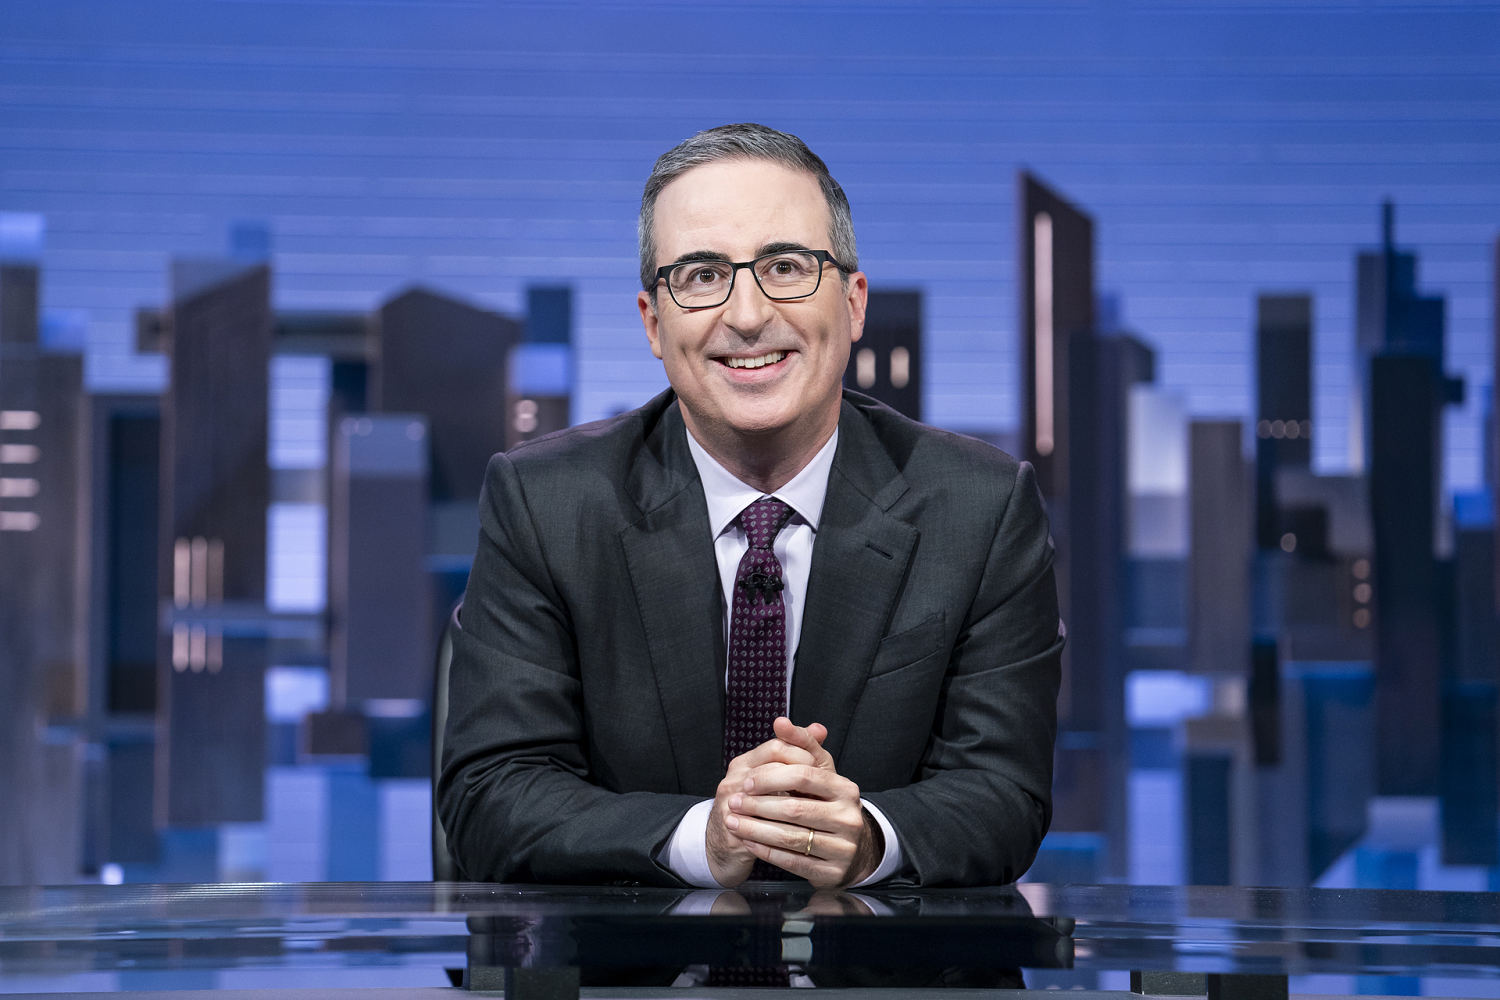 ‘last week tonight with john oliver’ no longer hitting youtube the day after airing